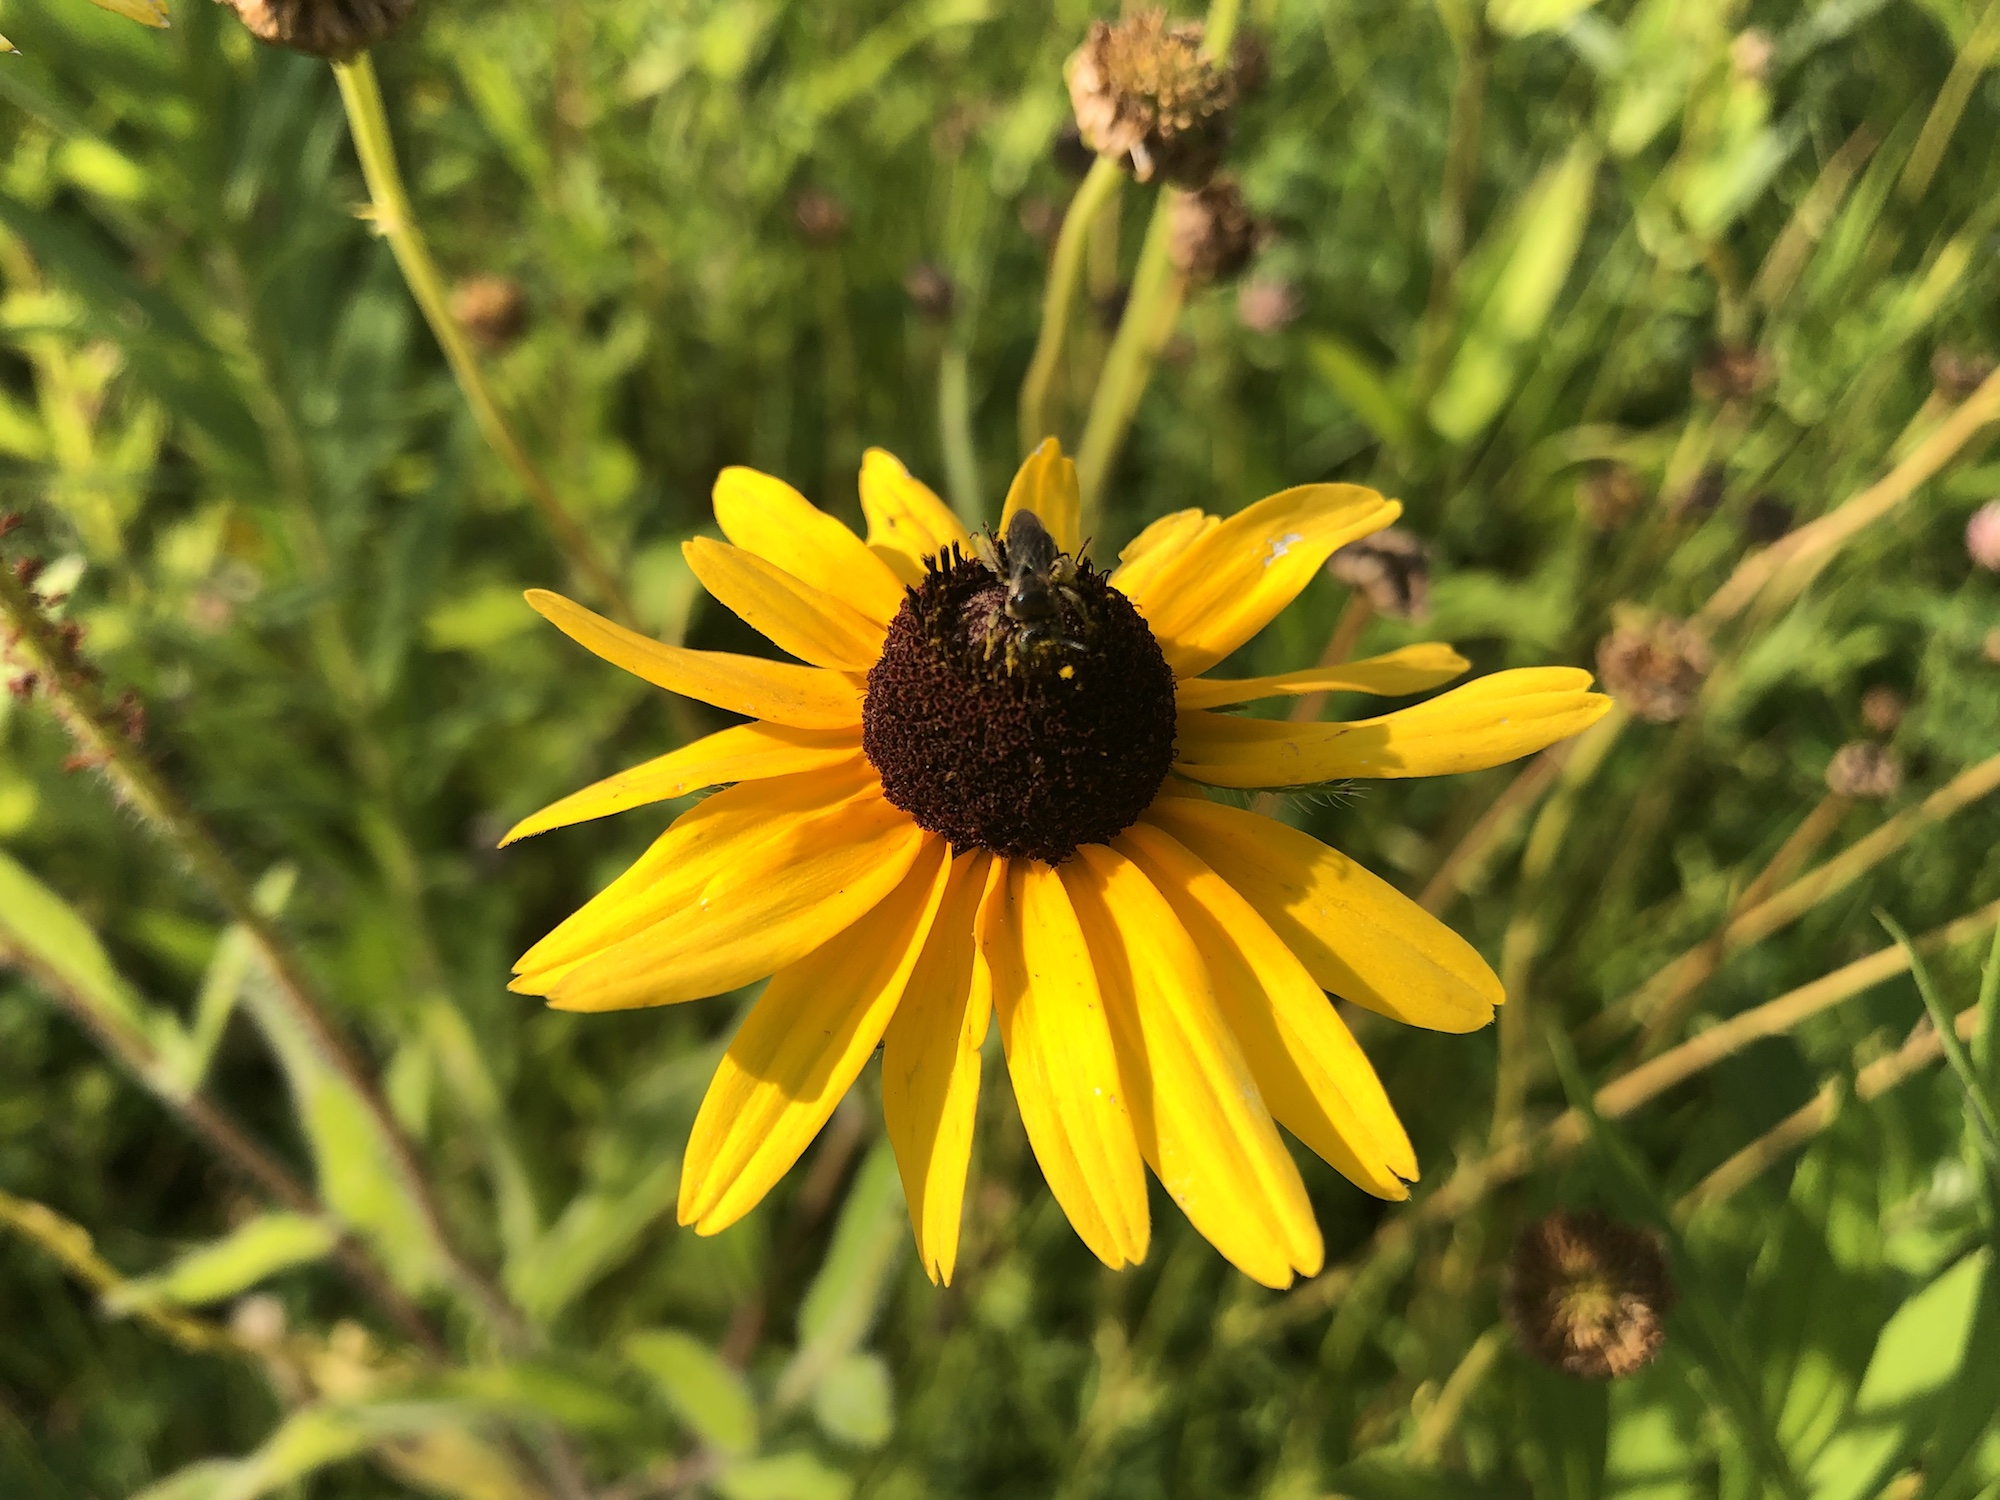 Black-eyed Susan on bank of retaining pond in Madison, Wisconsin on July 28, 2019.